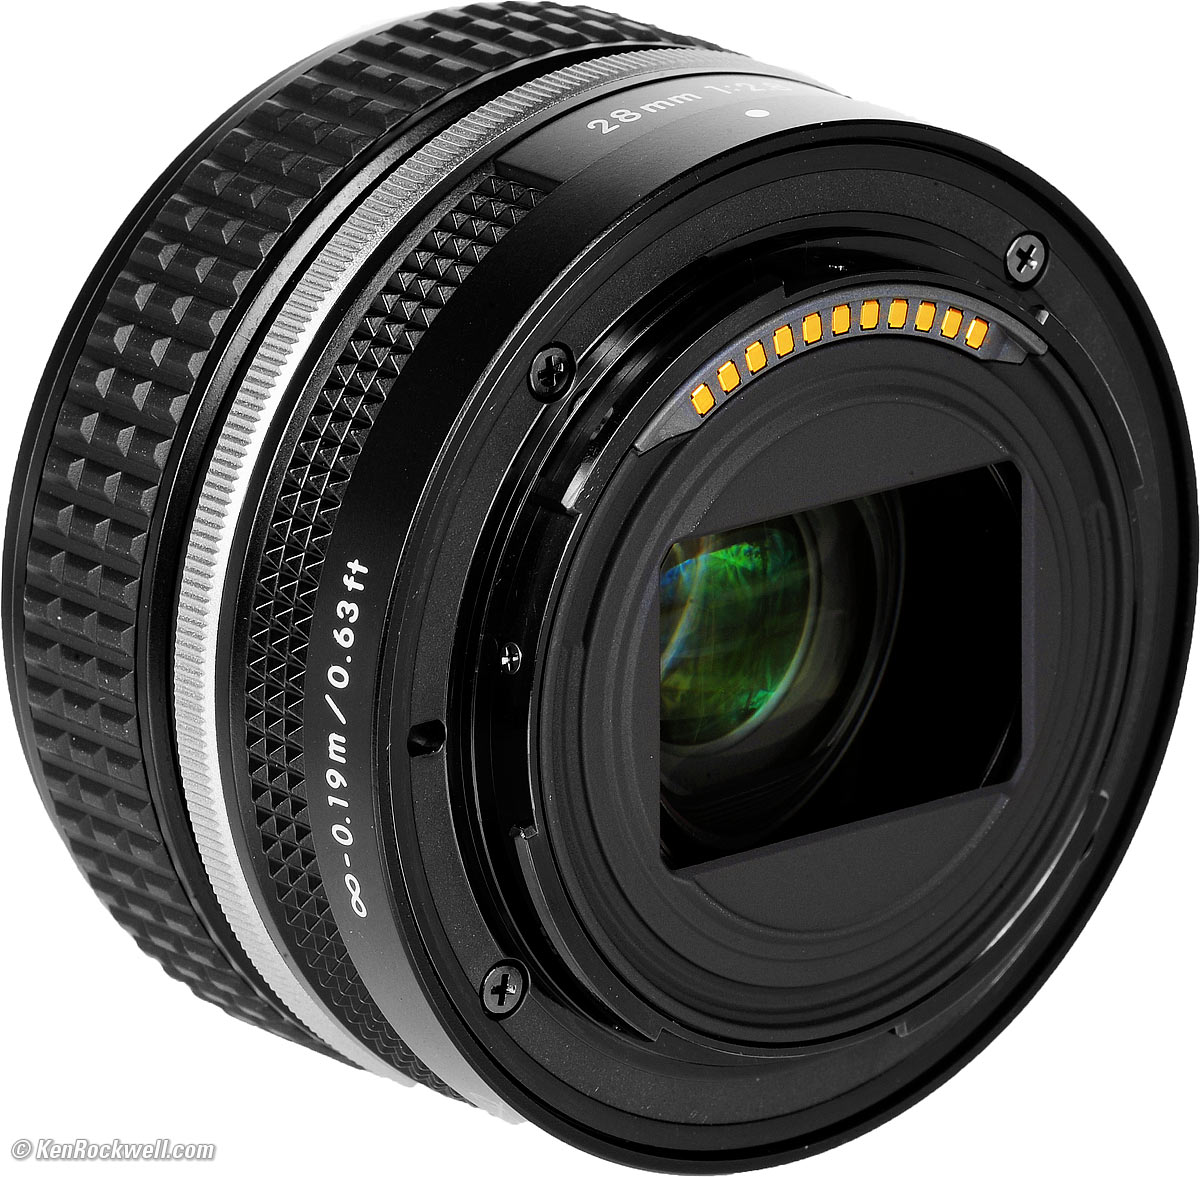 Nikon Z 28mm f/2.8 SE Special Edition Review & Sample Images by